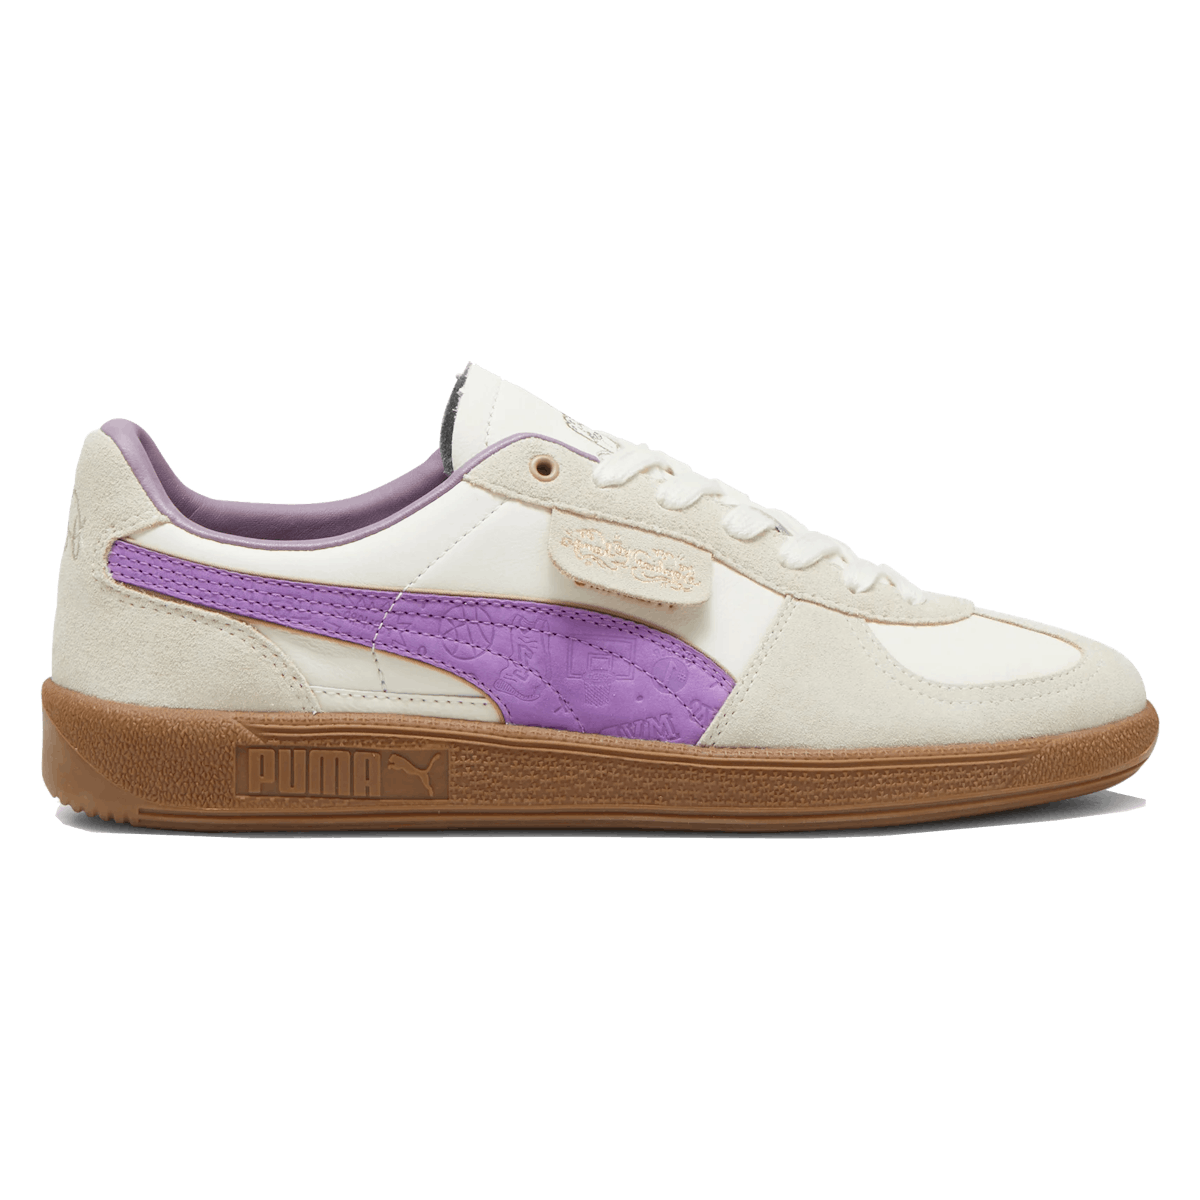 Sophia Chang x Puma Palermo " Frosted Ivory"